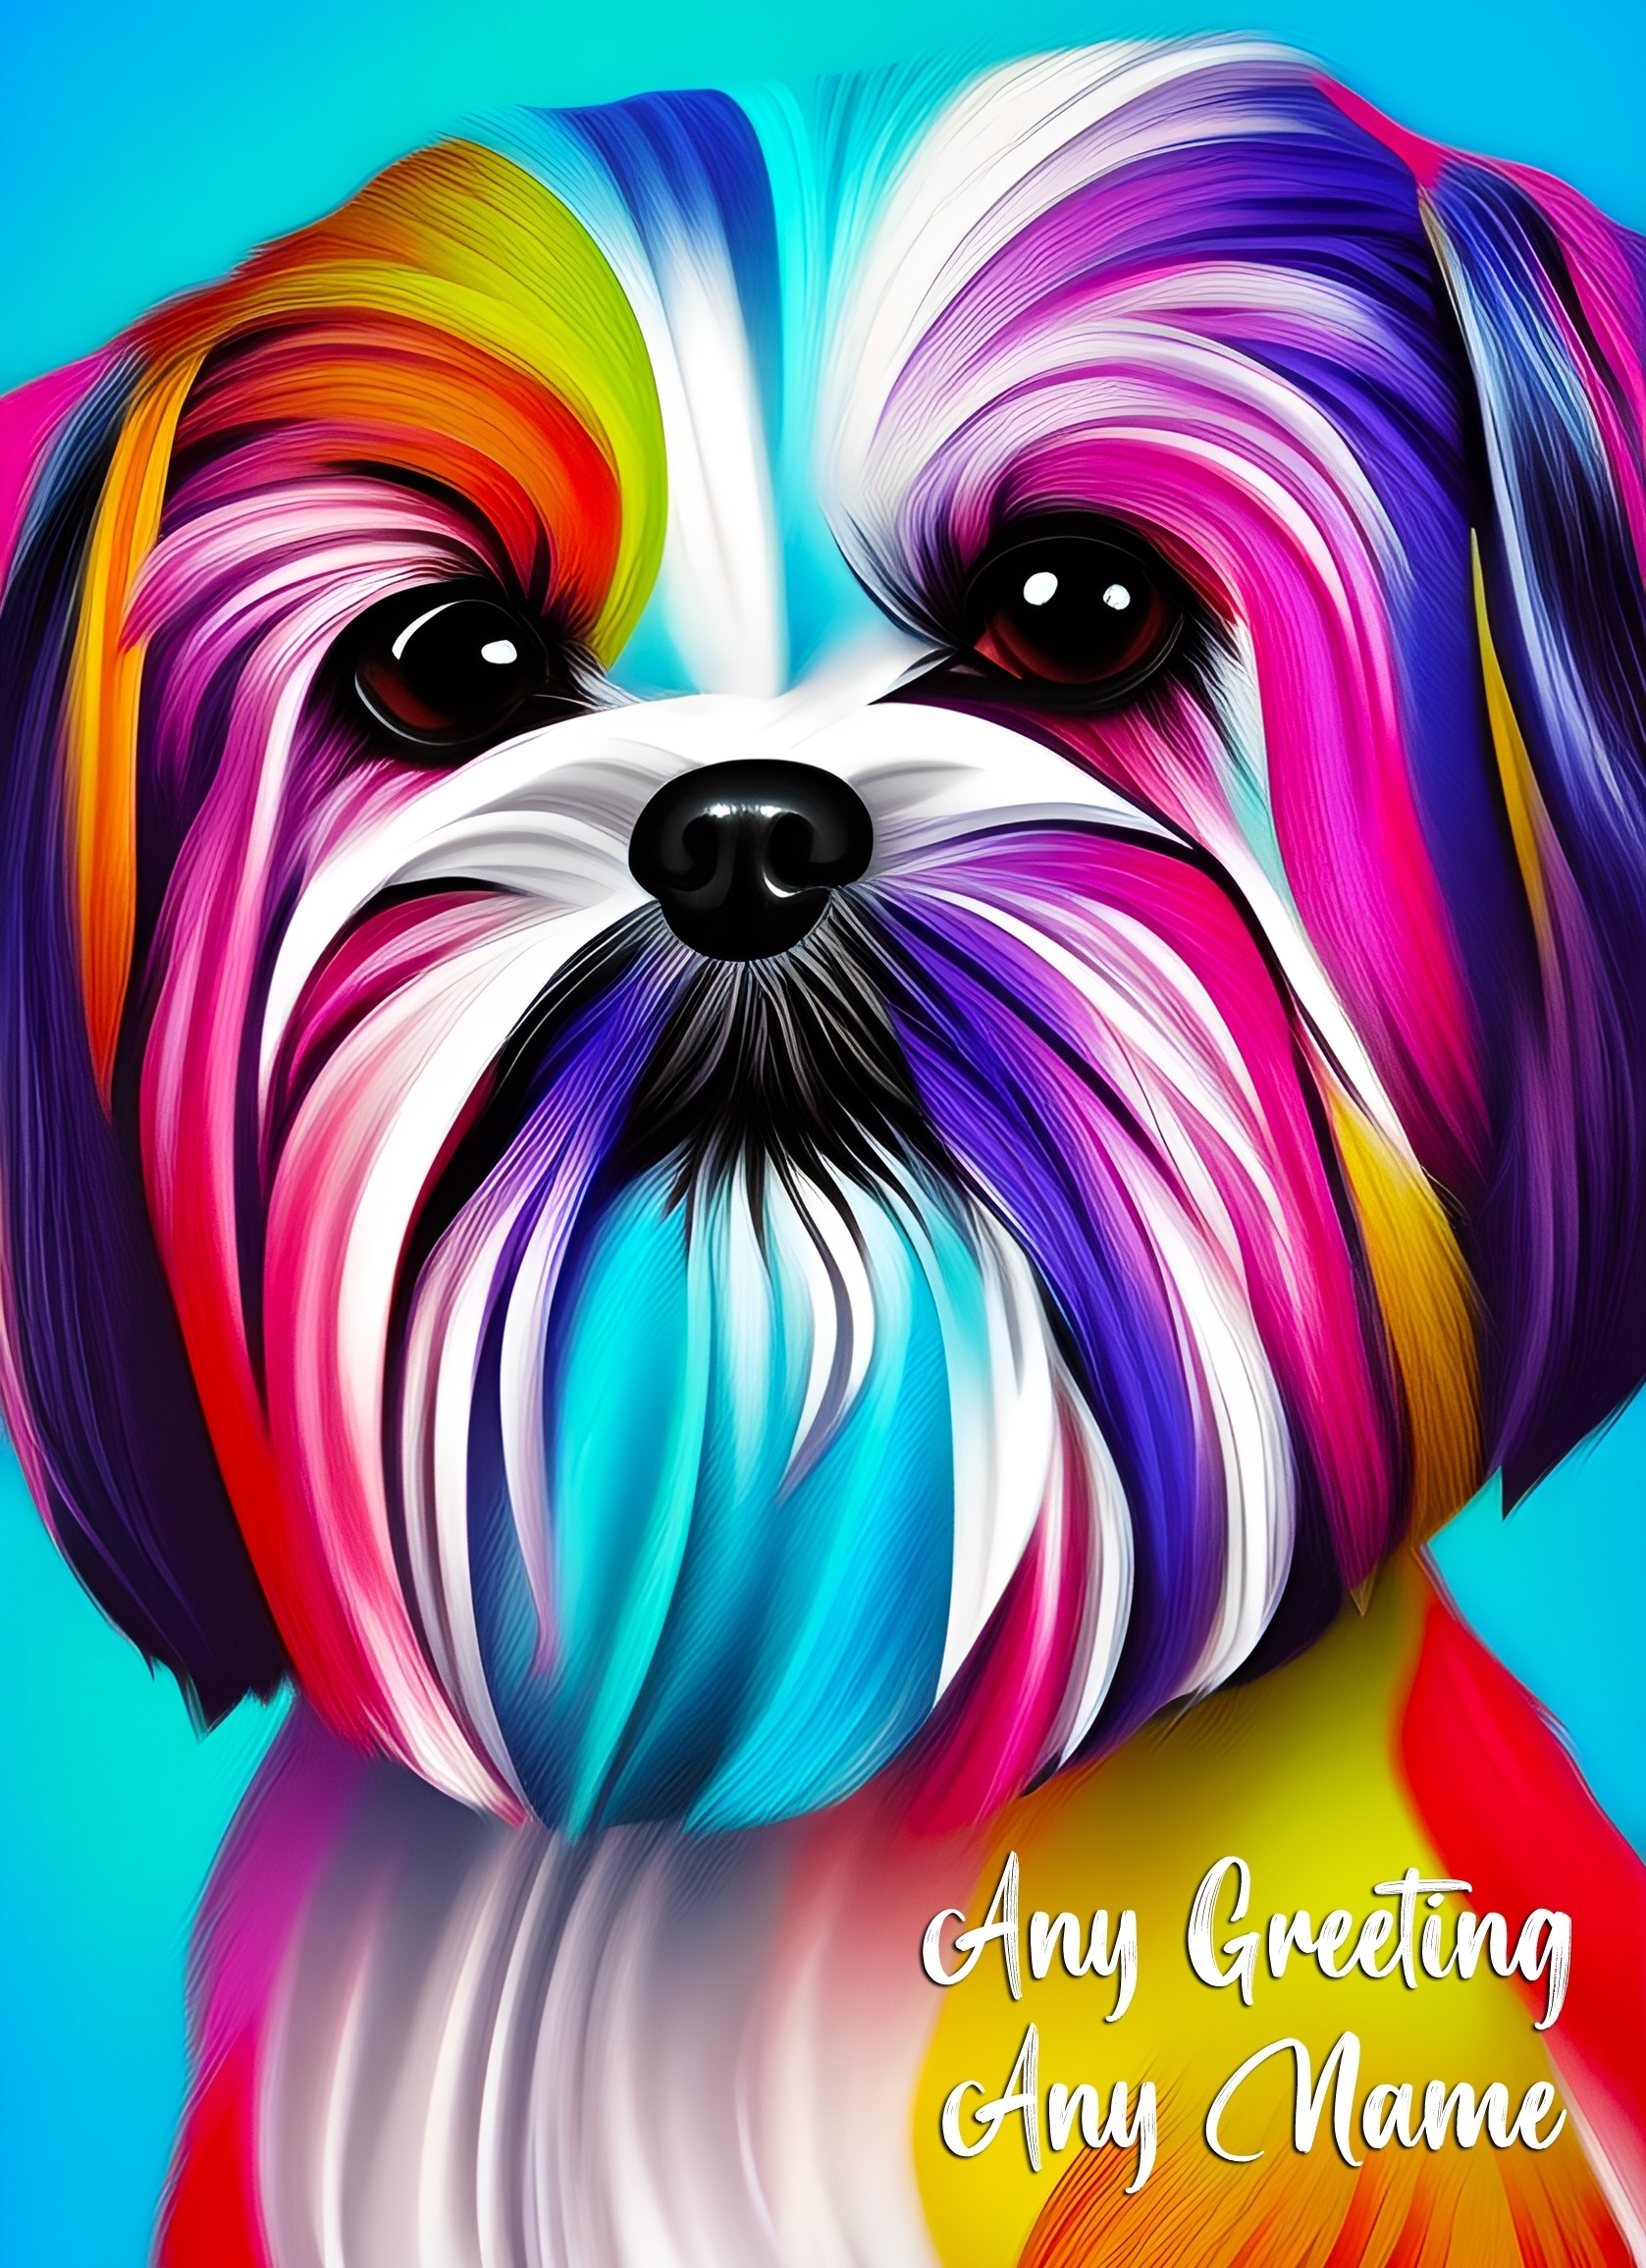 Personalised Shih Tzu Dog Colourful Abstract Art Blank Greeting Card (Birthday, Fathers Day, Any Occasion)